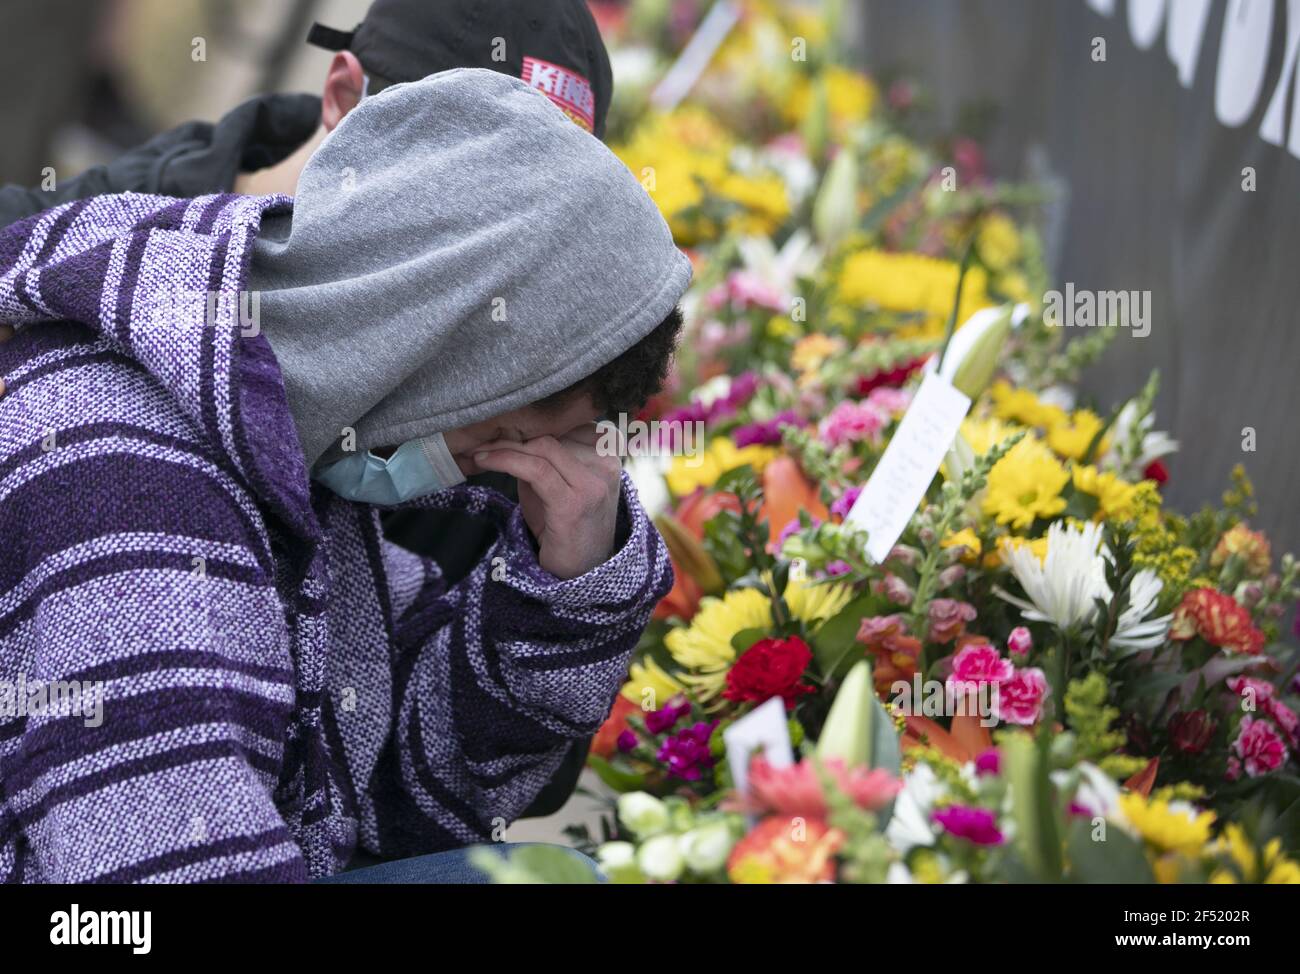 Boulder, United States. 23rd Mar, 2021. A man grieves after laying flowers outside a King Soopers grocery store where 10 people, including a police officer, were killed in a shooting Monday, in Boulder, Colorado, on Tuesday, March 23, 2021. Police said a suspect, identified as Ahmad Al Aliwi Alissa, was in custody and charged with 10 counts of first-degree murder. Photo by Bob Strong/UPI Credit: UPI/Alamy Live News Stock Photo